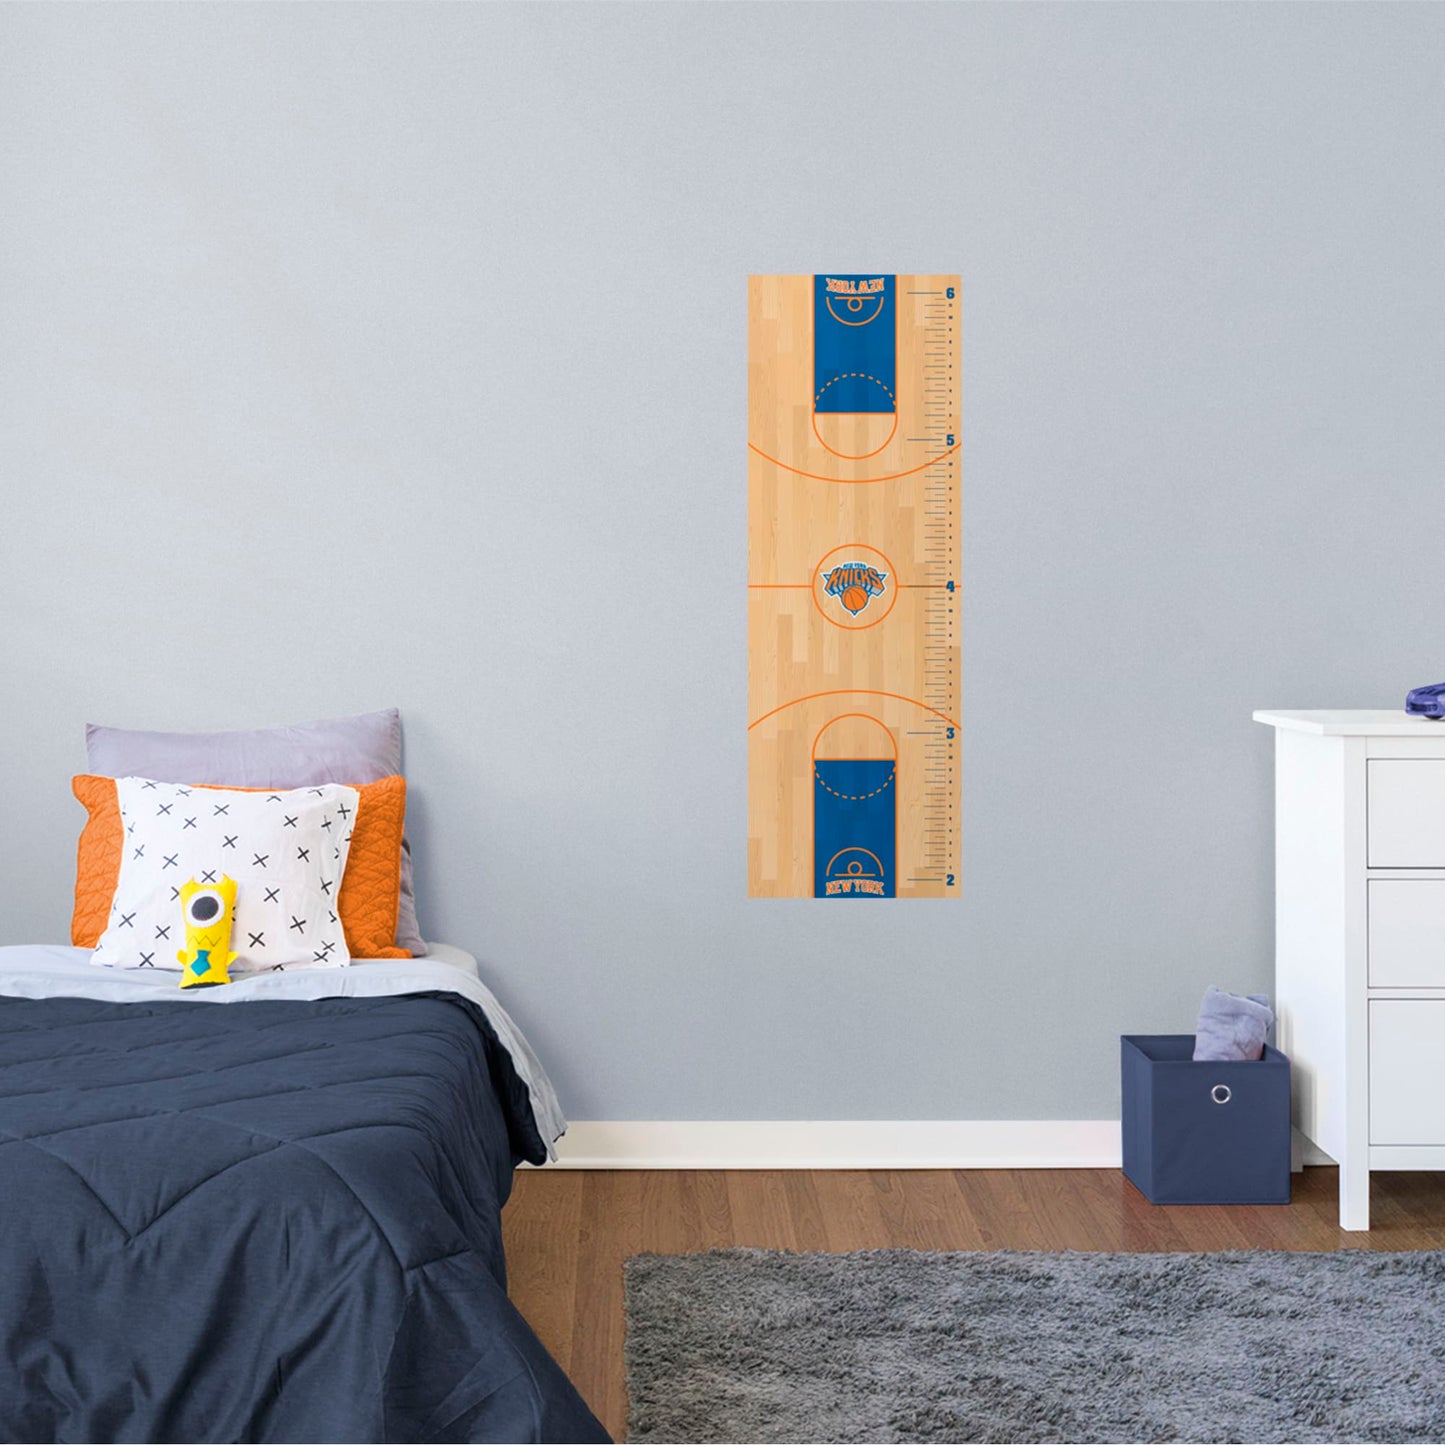 New York Knicks: Growth Chart - Officially Licensed NBA Removable Wall Decal